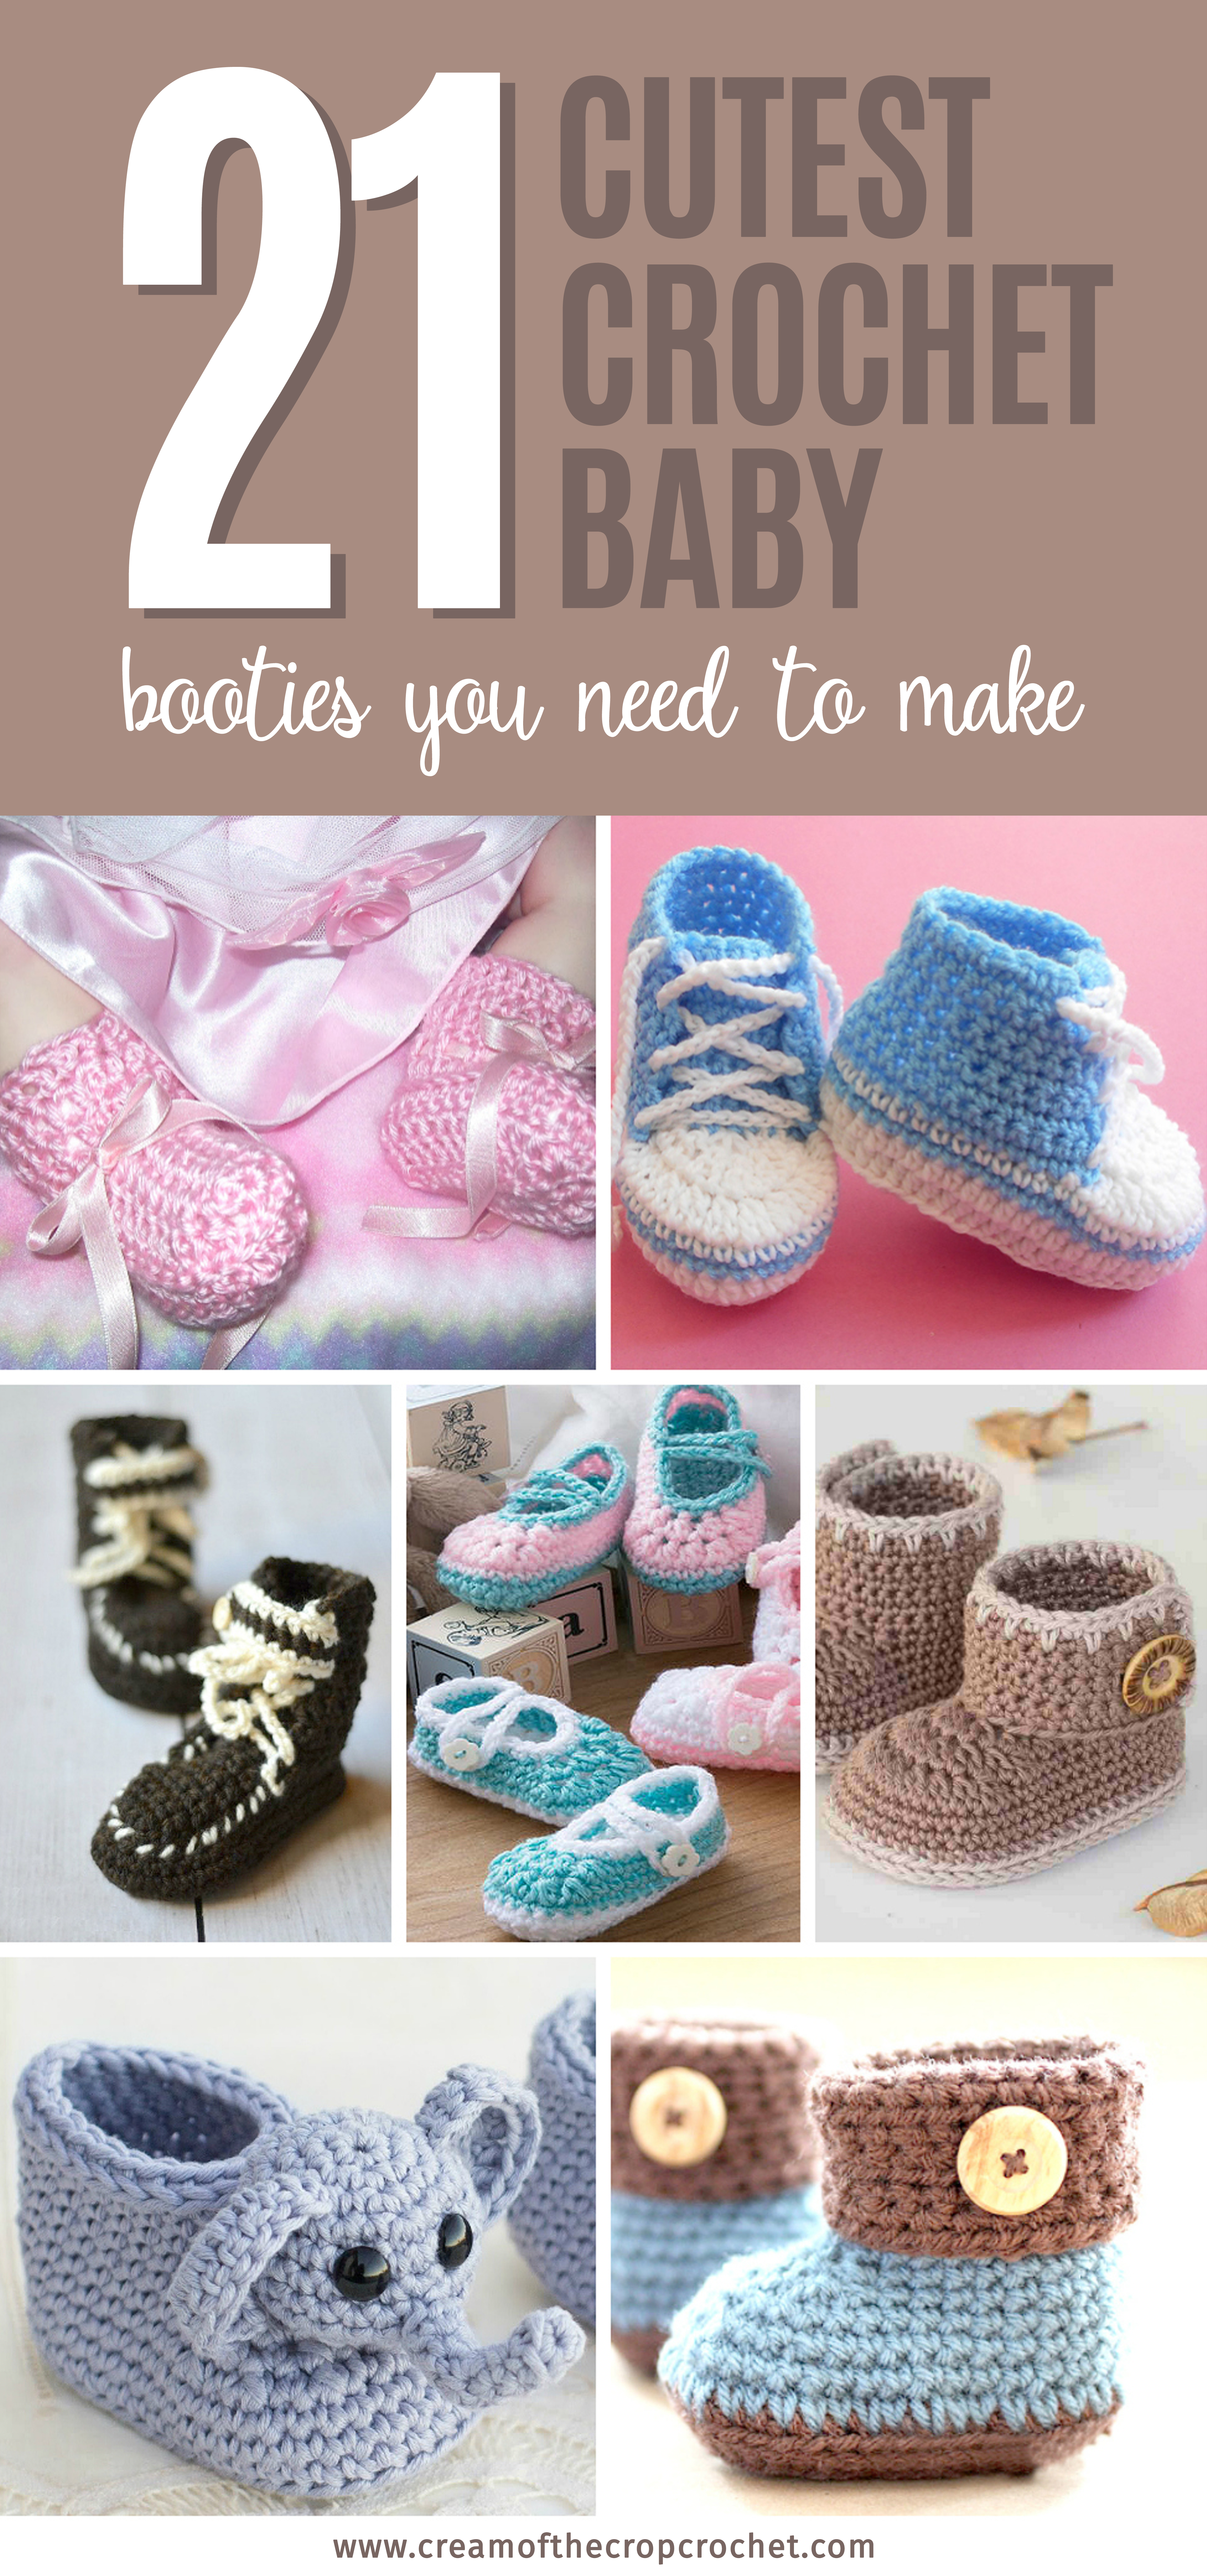 The Cutest Crochet Baby Booties You Need To Make - We picked all of the best patterns for #crochetbabybooties and put them in one place. #crochetpattern #crochetbooties #babycrochet #crochetlove